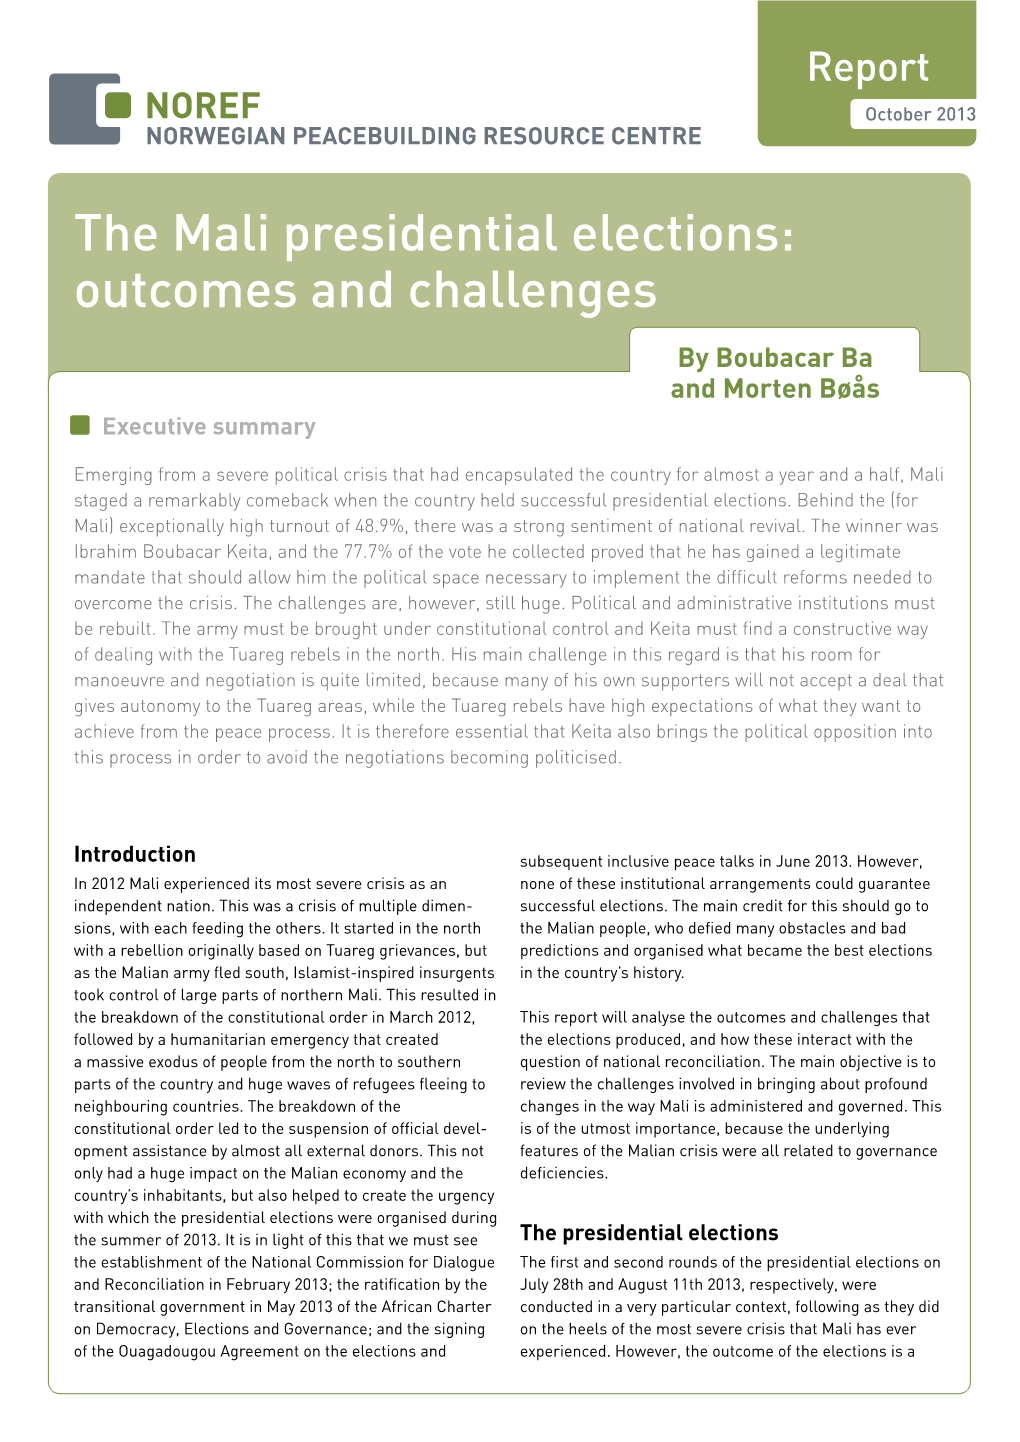 The Mali Presidential Elections: Outcomes and Challenges